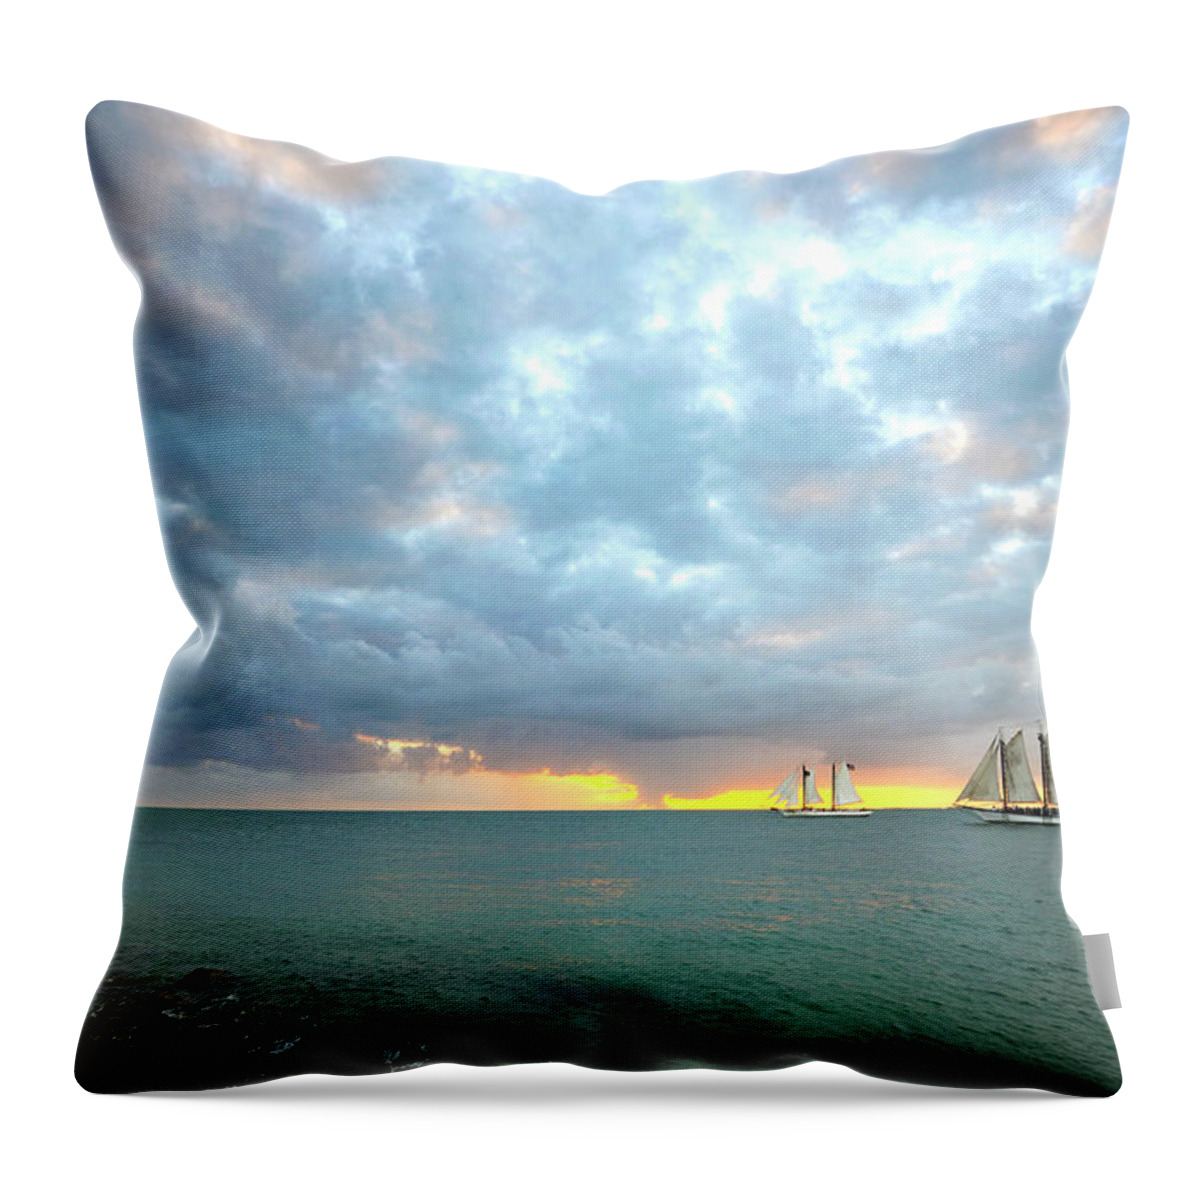 Water's Edge Throw Pillow featuring the photograph Sundown Schooners In Key West by Mikecherim